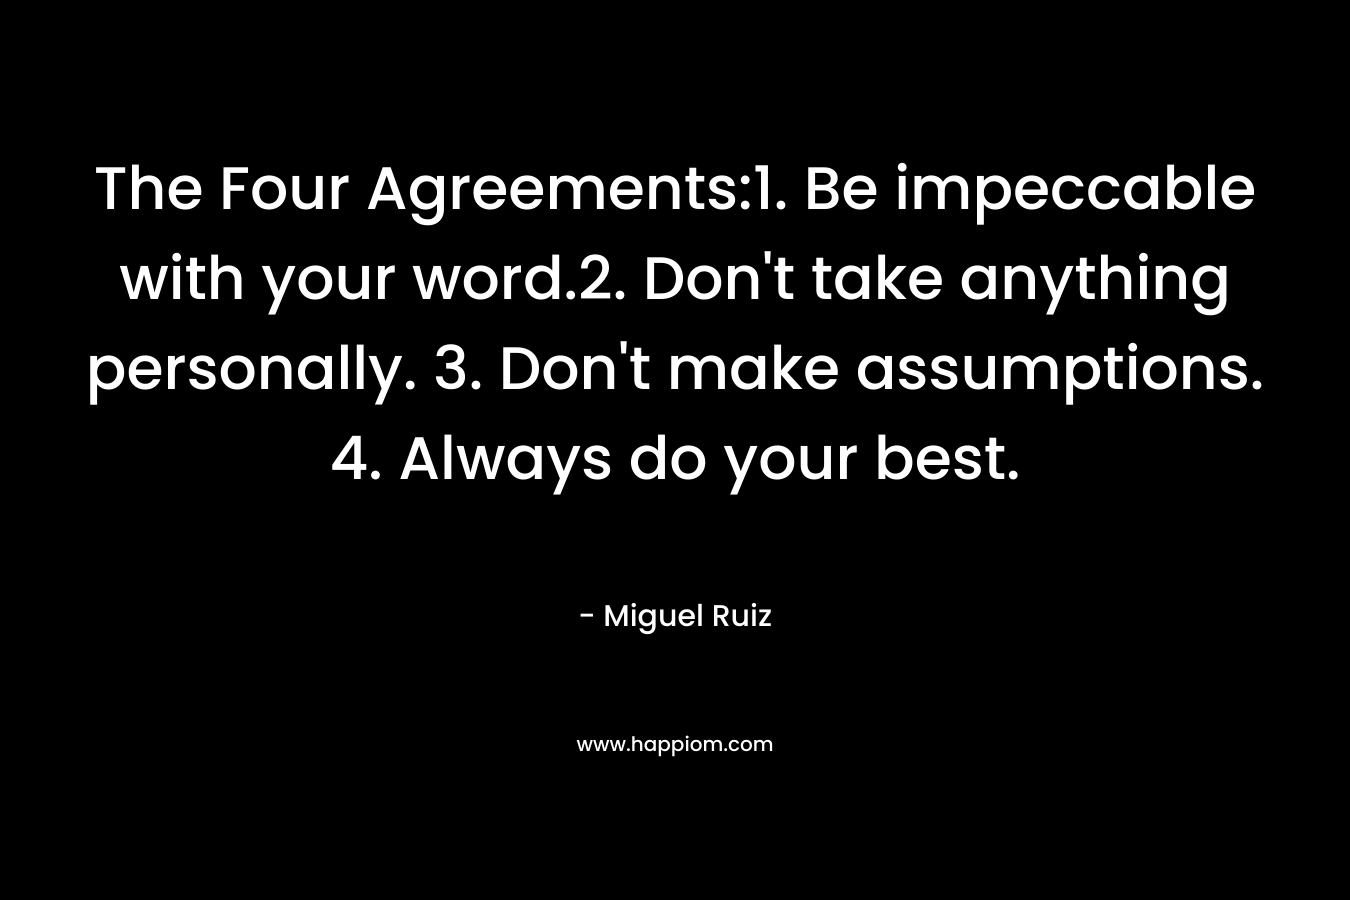 The Four Agreements:1. Be impeccable with your word.2. Don’t take anything personally. 3. Don’t make assumptions. 4. Always do your best. – Miguel Ruiz